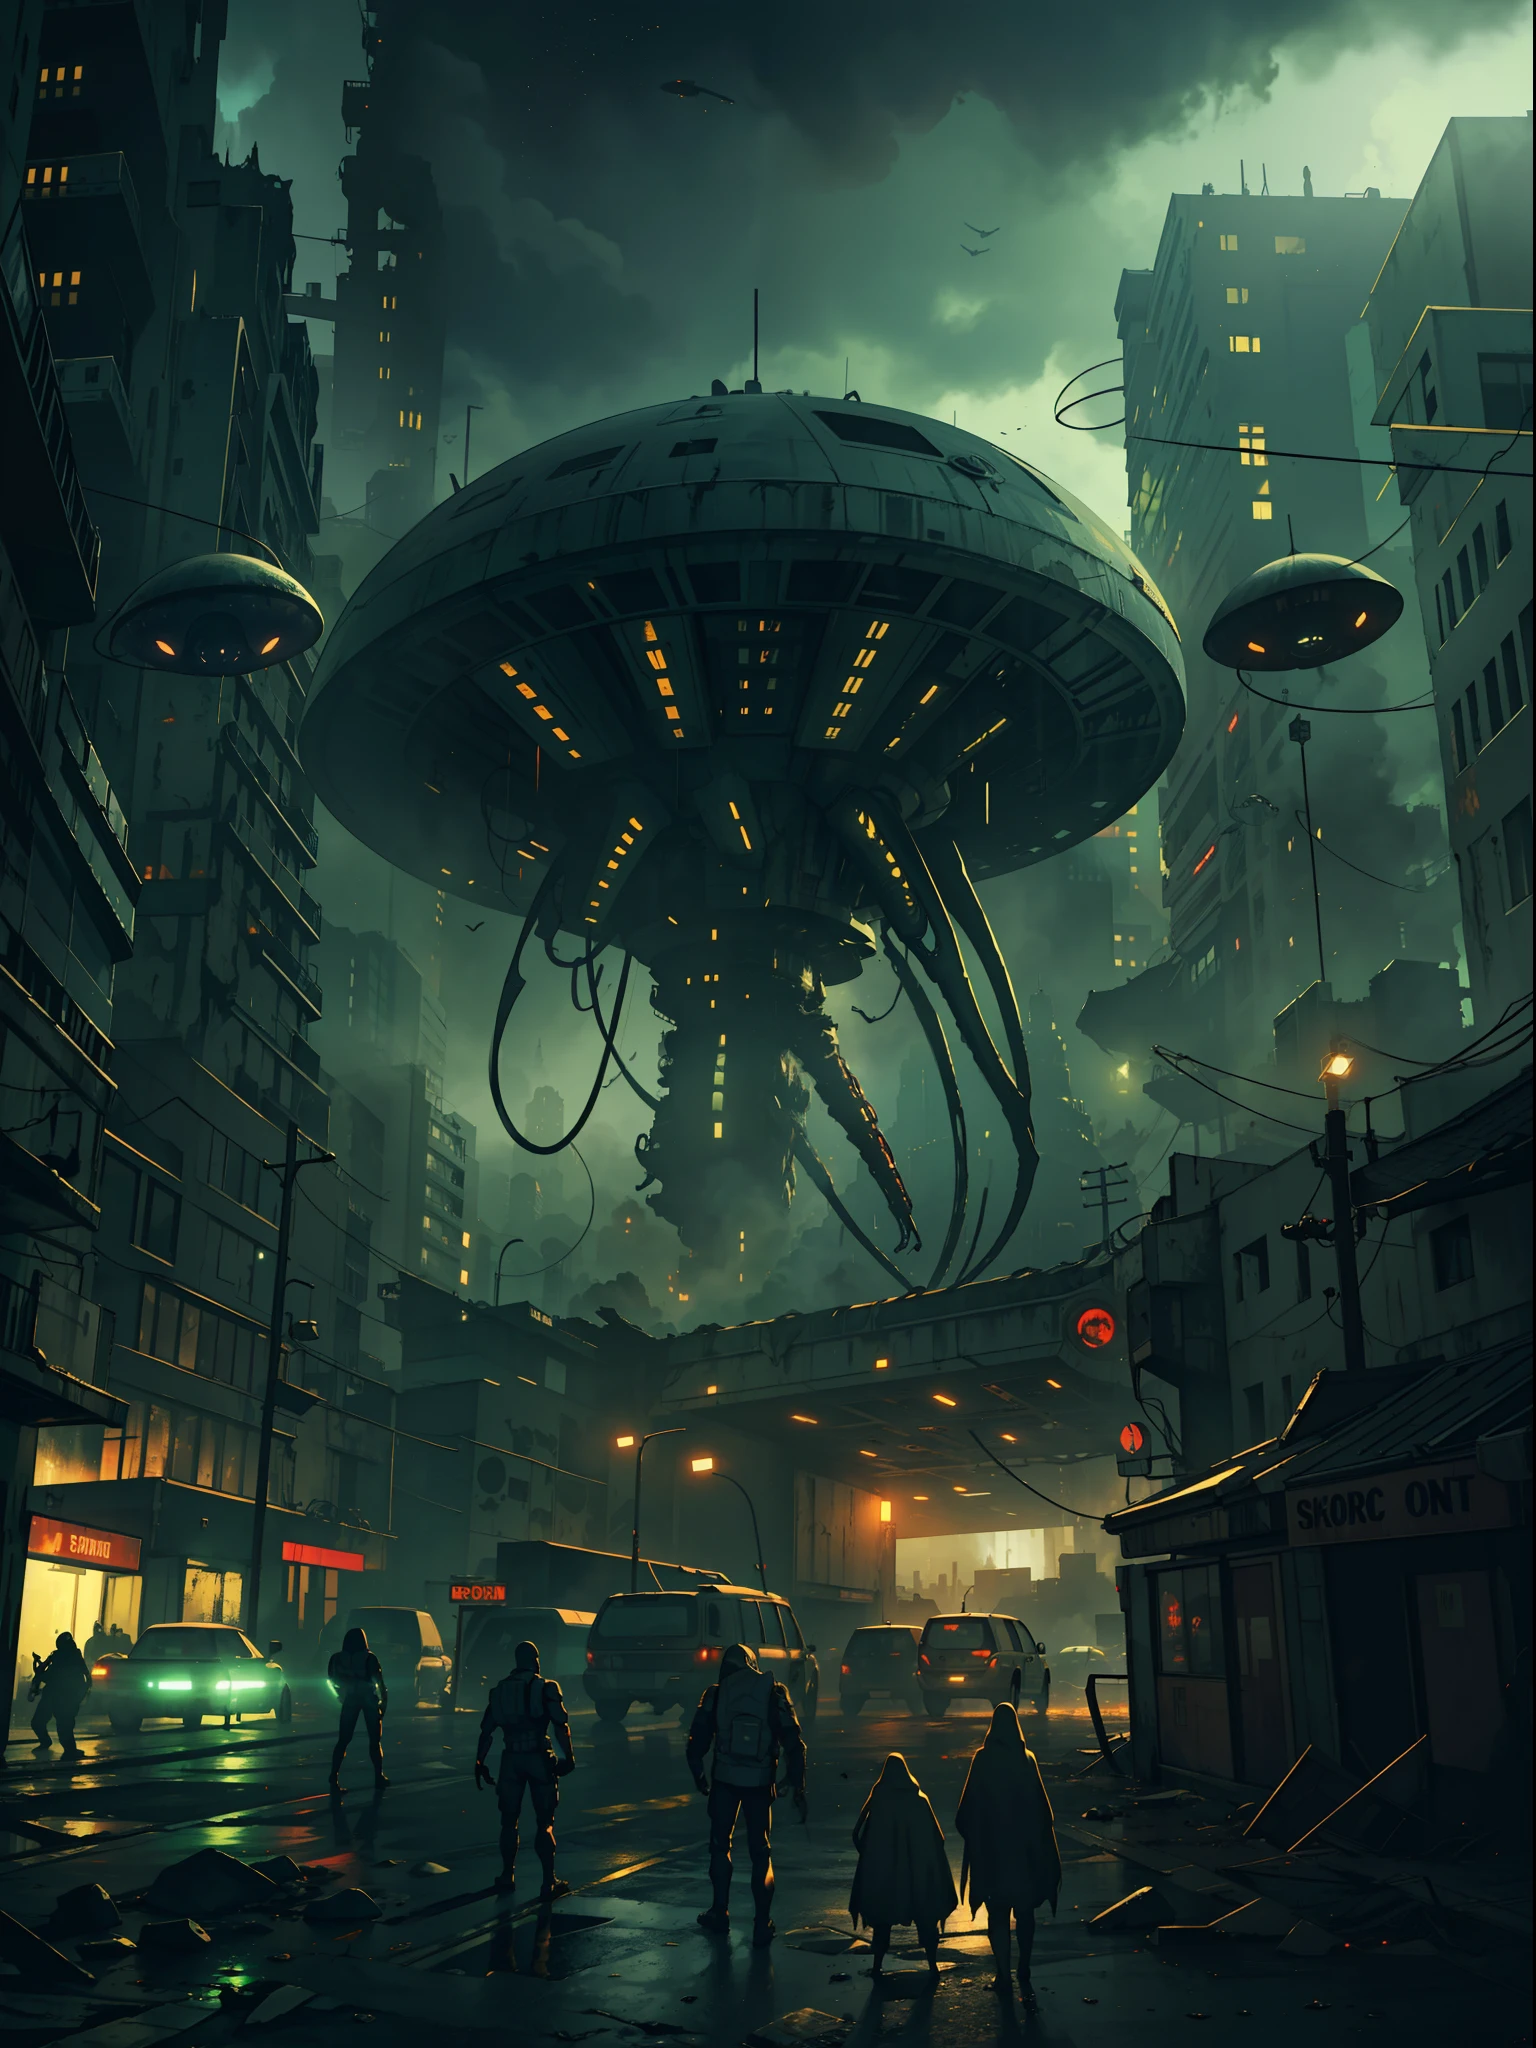 "Creepy and intense alien invasion scene with dark atmosphere, dramatic lighting, and intense action. Show powerful extraterrestrial creatures, advanced technology, destroyed cityscape, panicked civilians, and a sense of imminent danger. Generate an unsettling and immersive image that captures the chaos and terror of an otherworldly invasion."